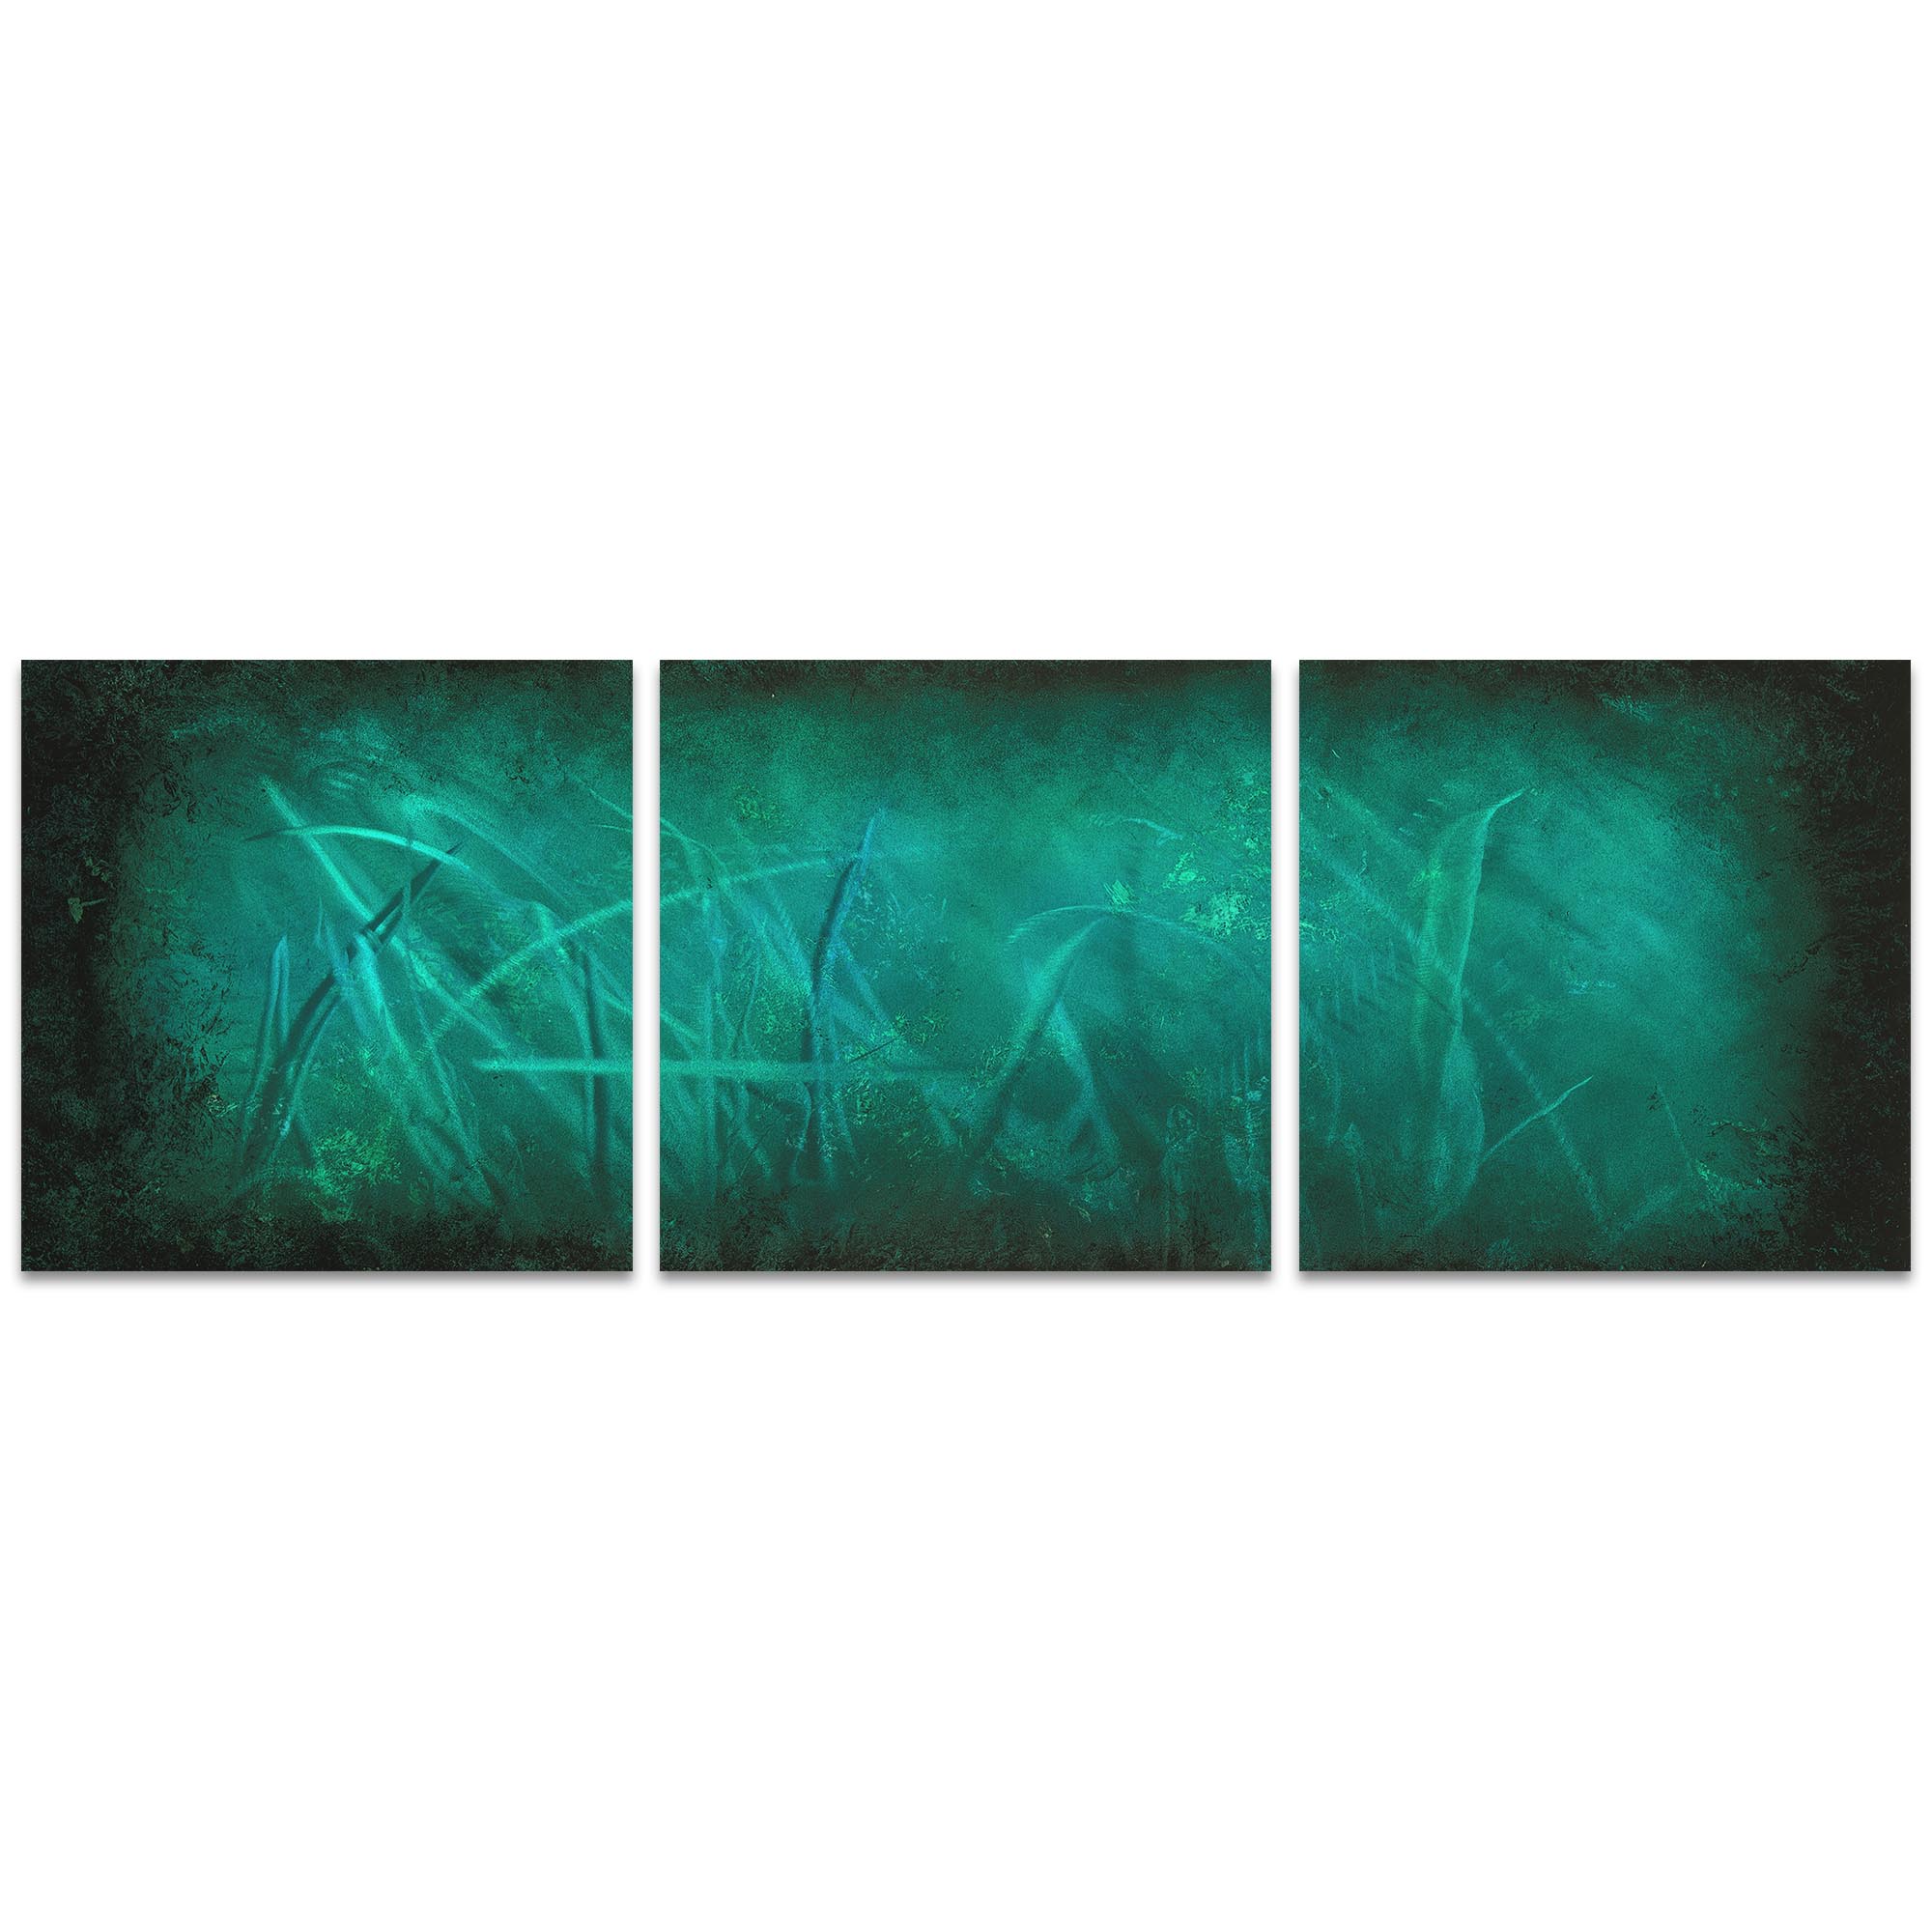 Ocean Mist Triptych 38x12in. Metal or Acrylic Abstract Decor